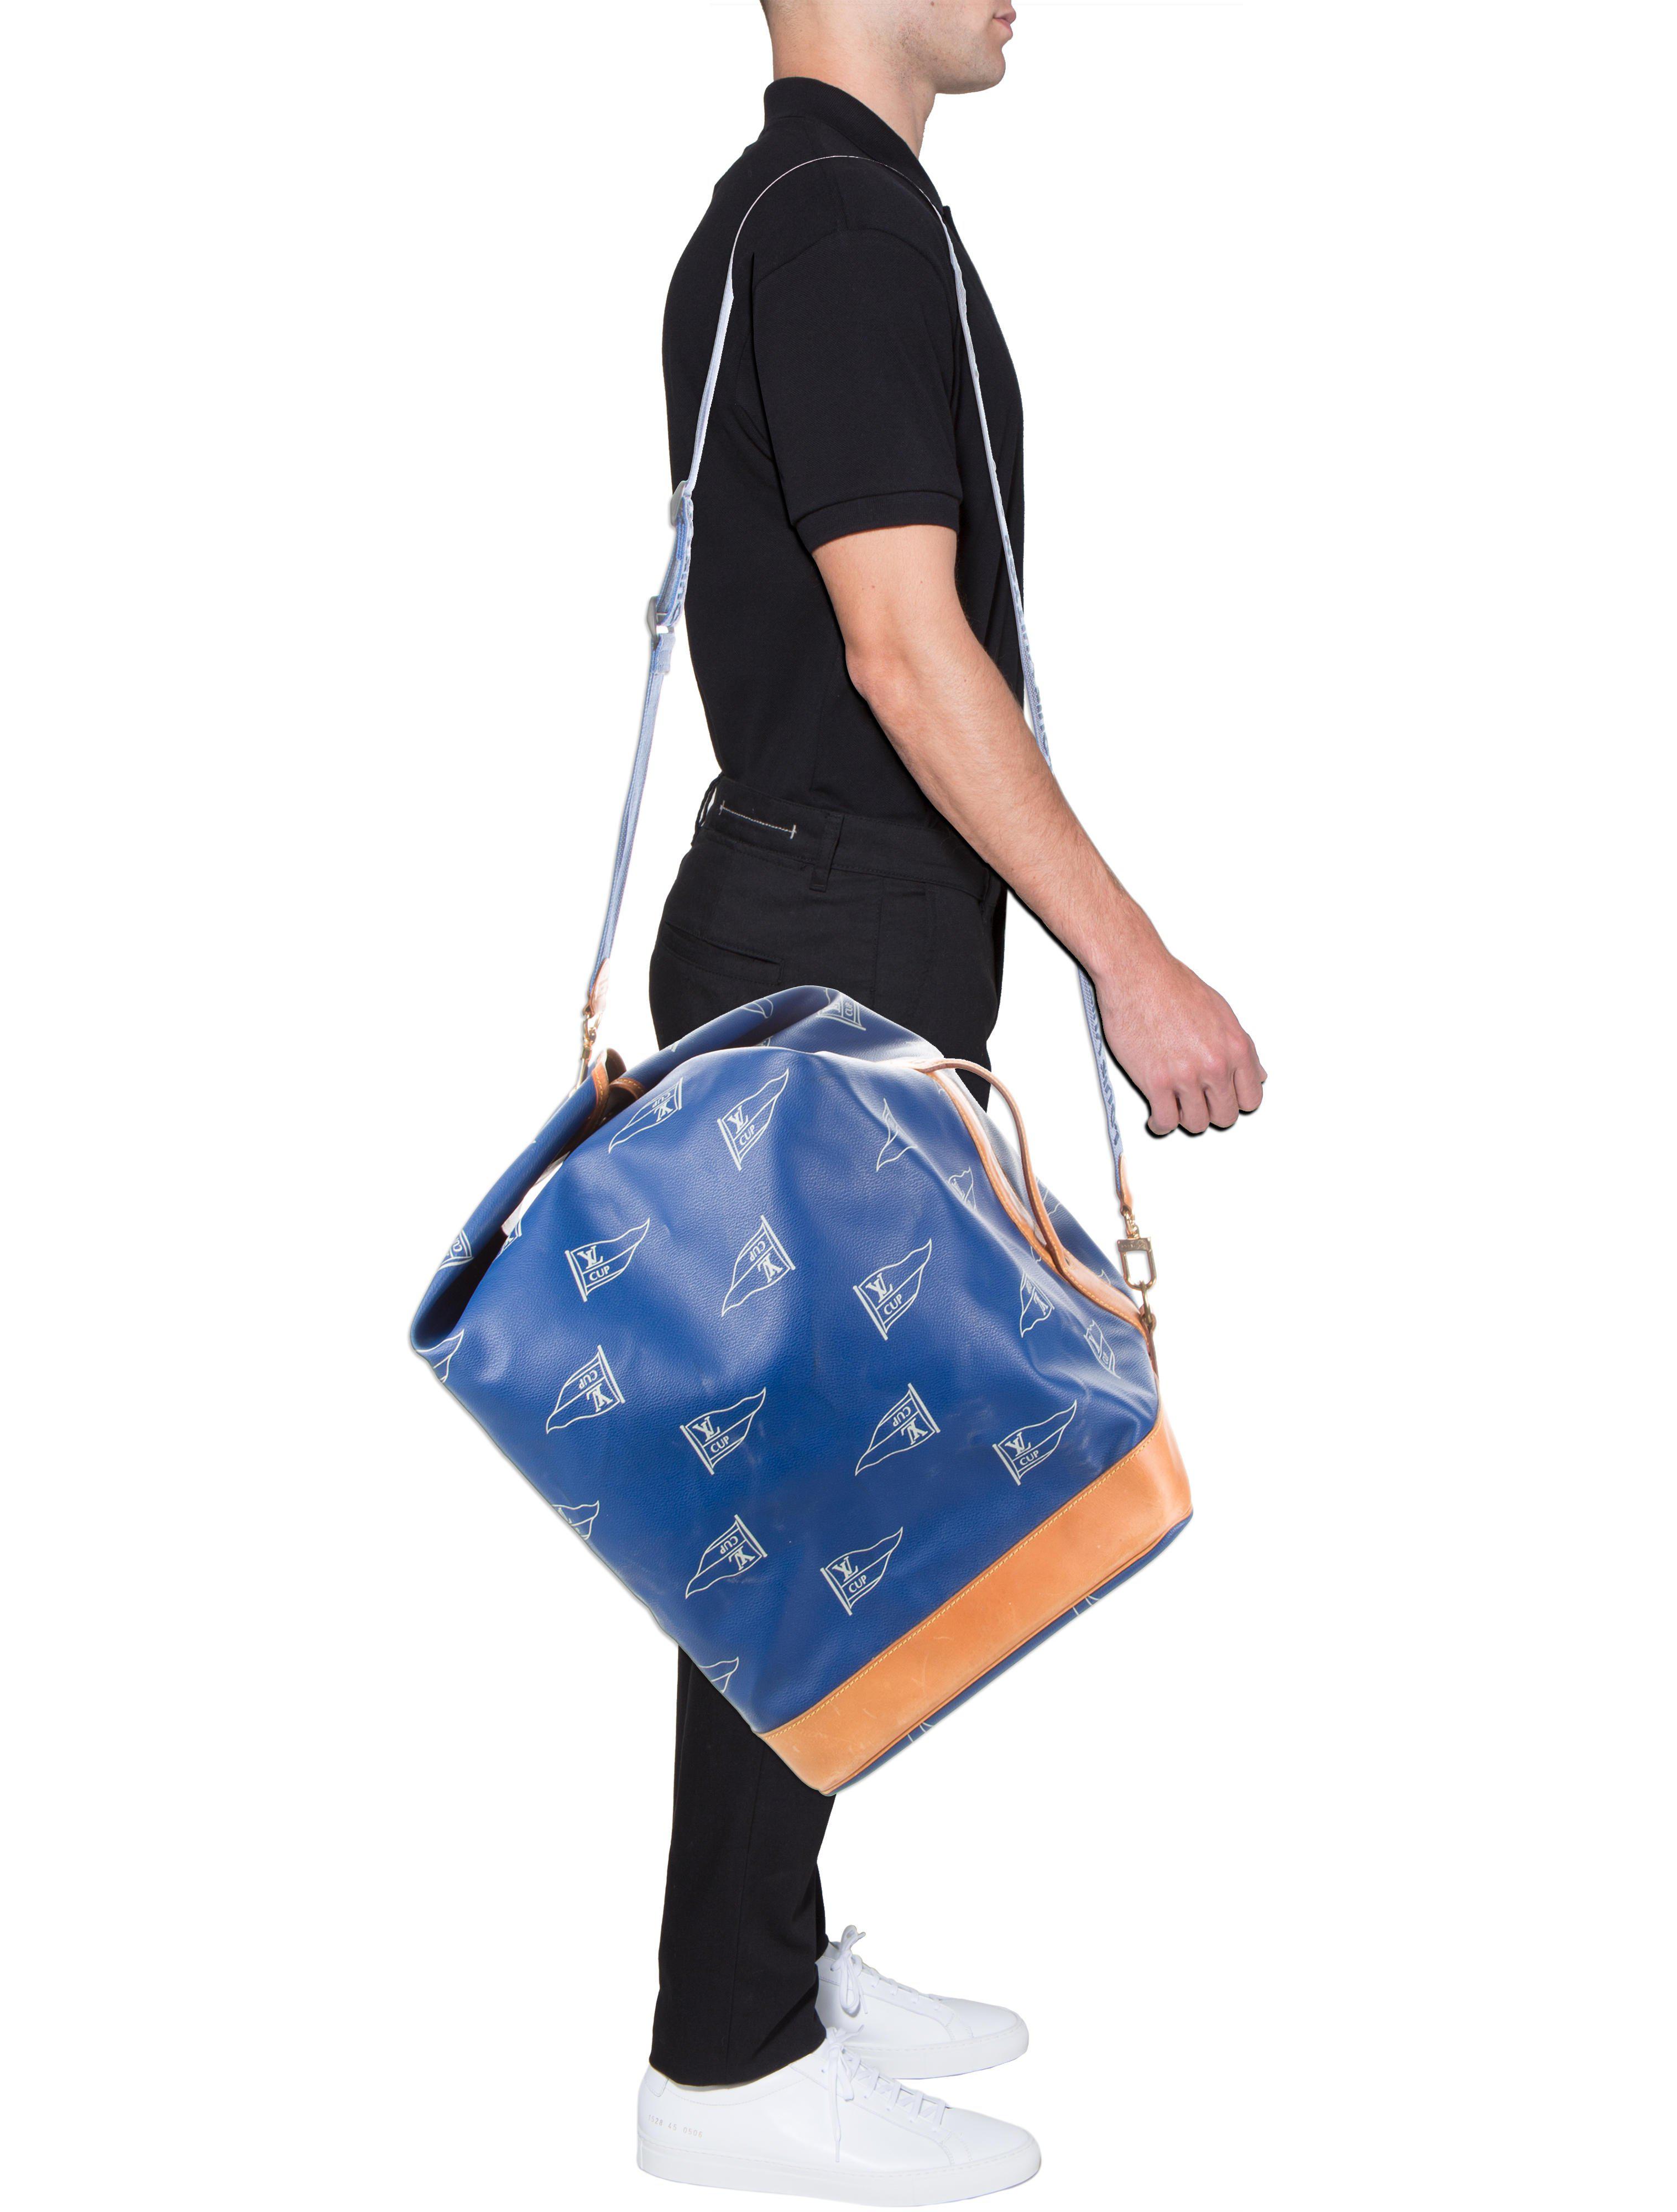 Lyst - Louis Vuitton Cup Sac Marin Bandoulière Blue in Natural for Men